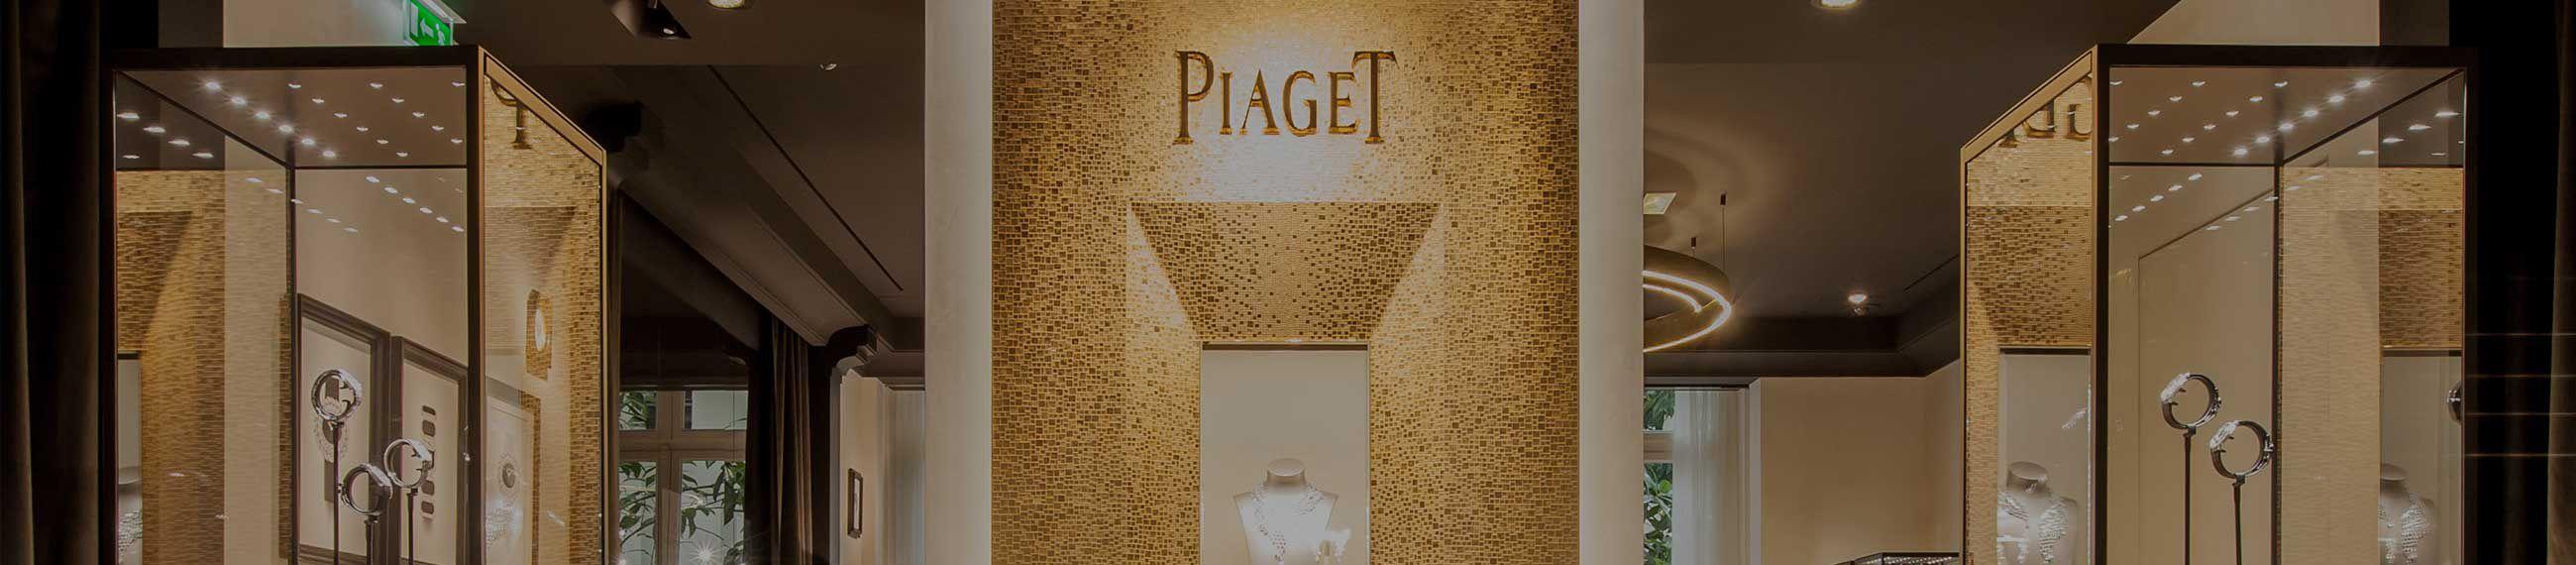 Piaget Logo - Piaget Boutiques in Santa Clara Watches & Jewelry Online